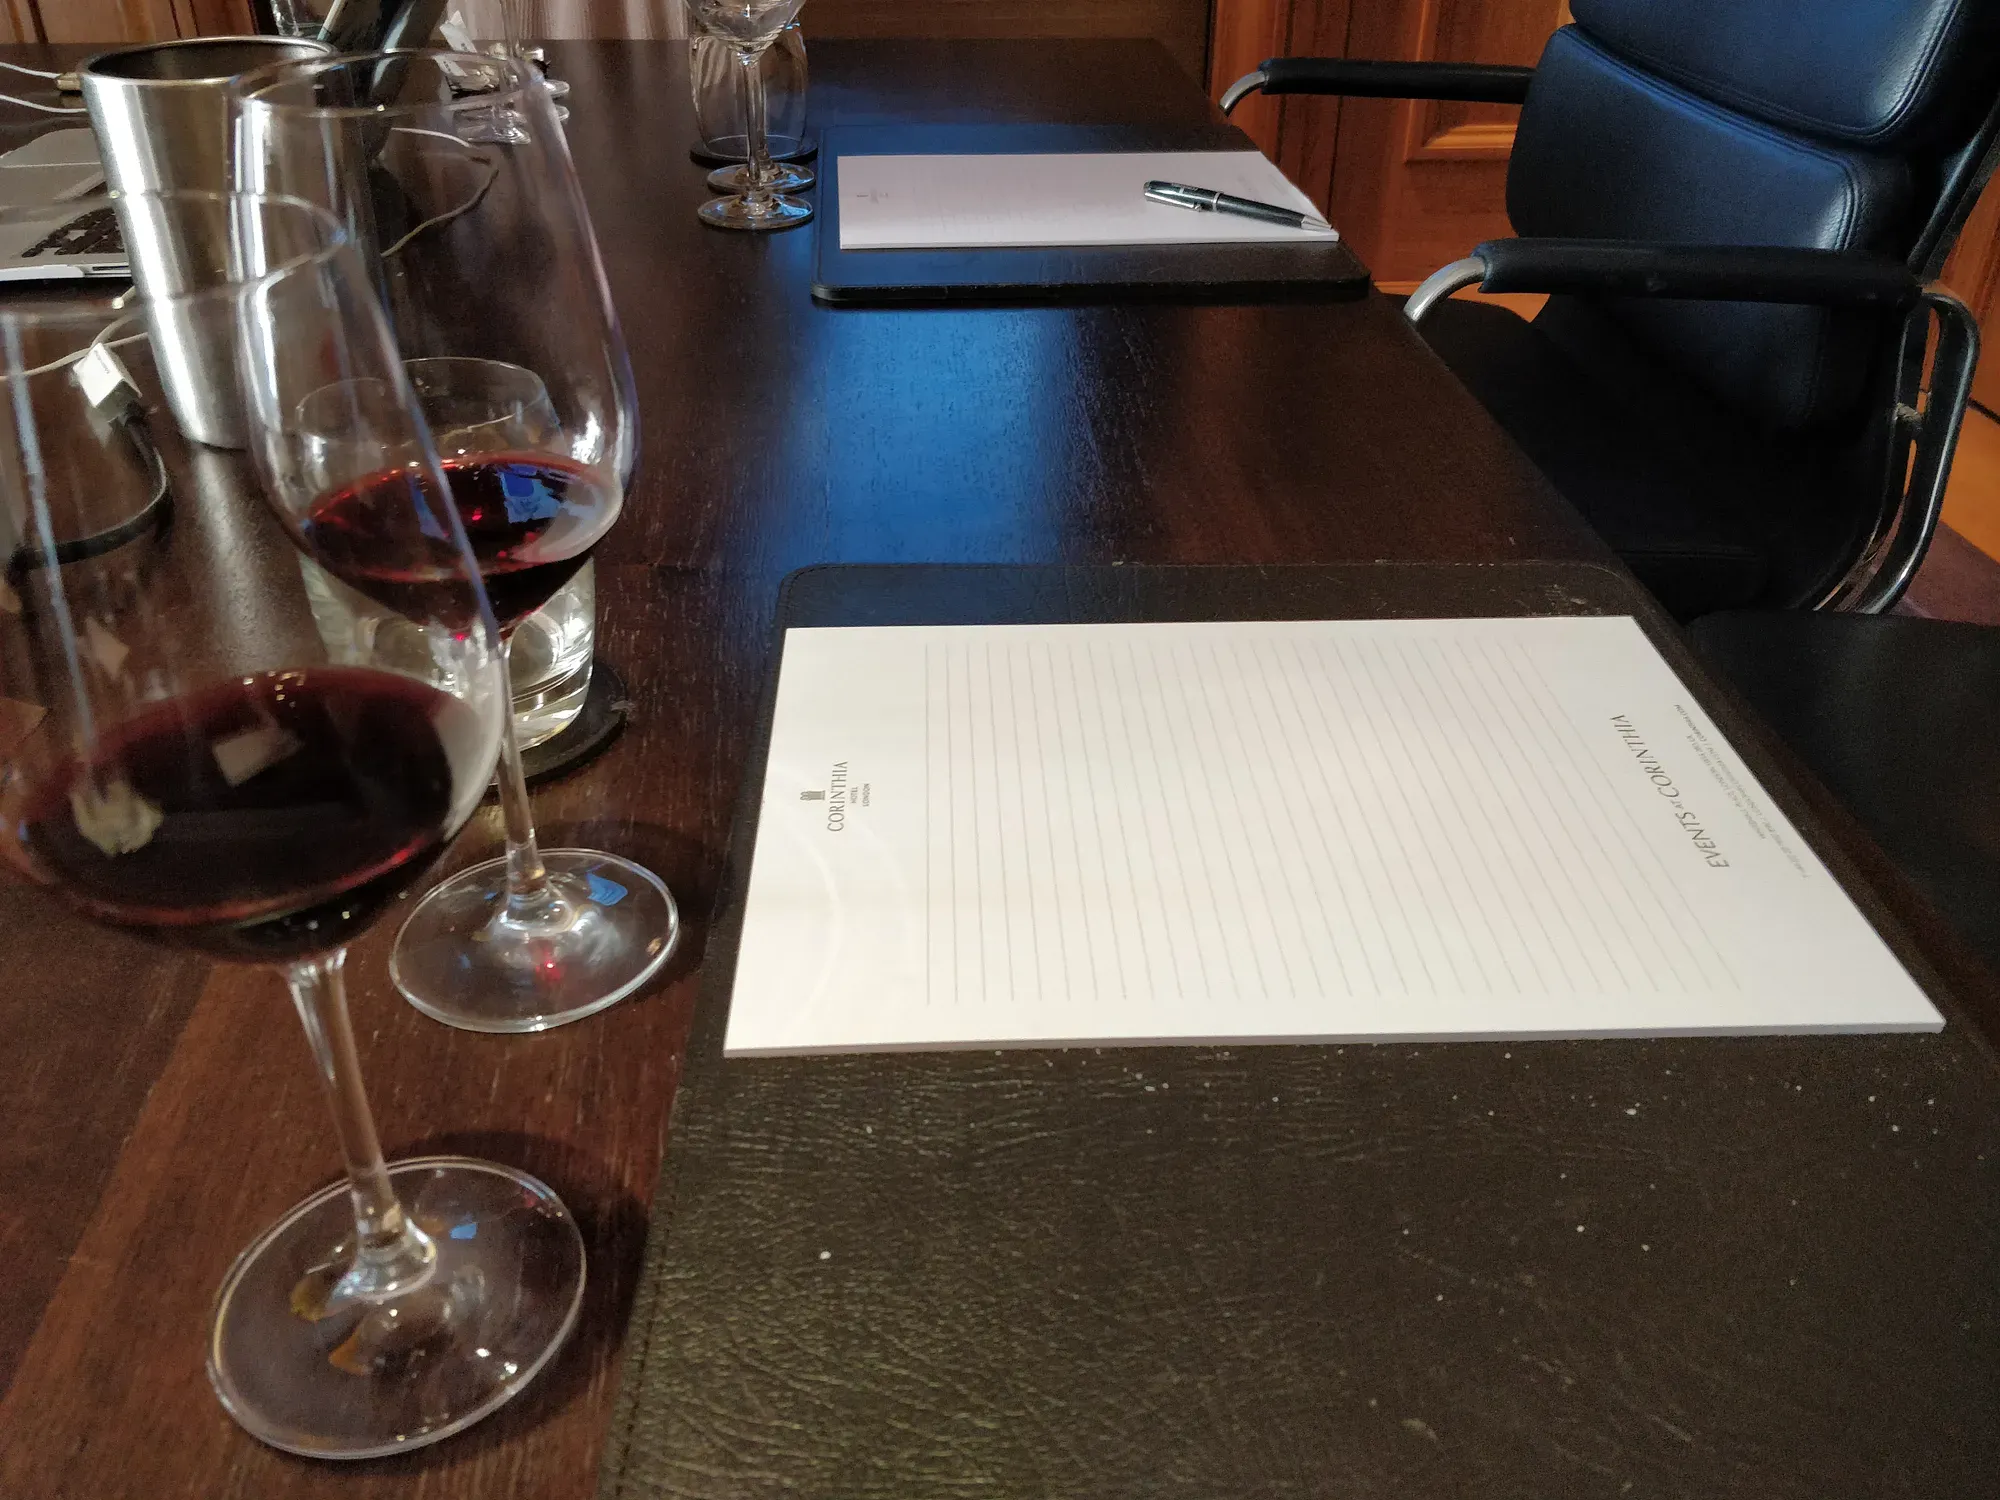 Tasting classes, snapshot from my WSET Level 2 course